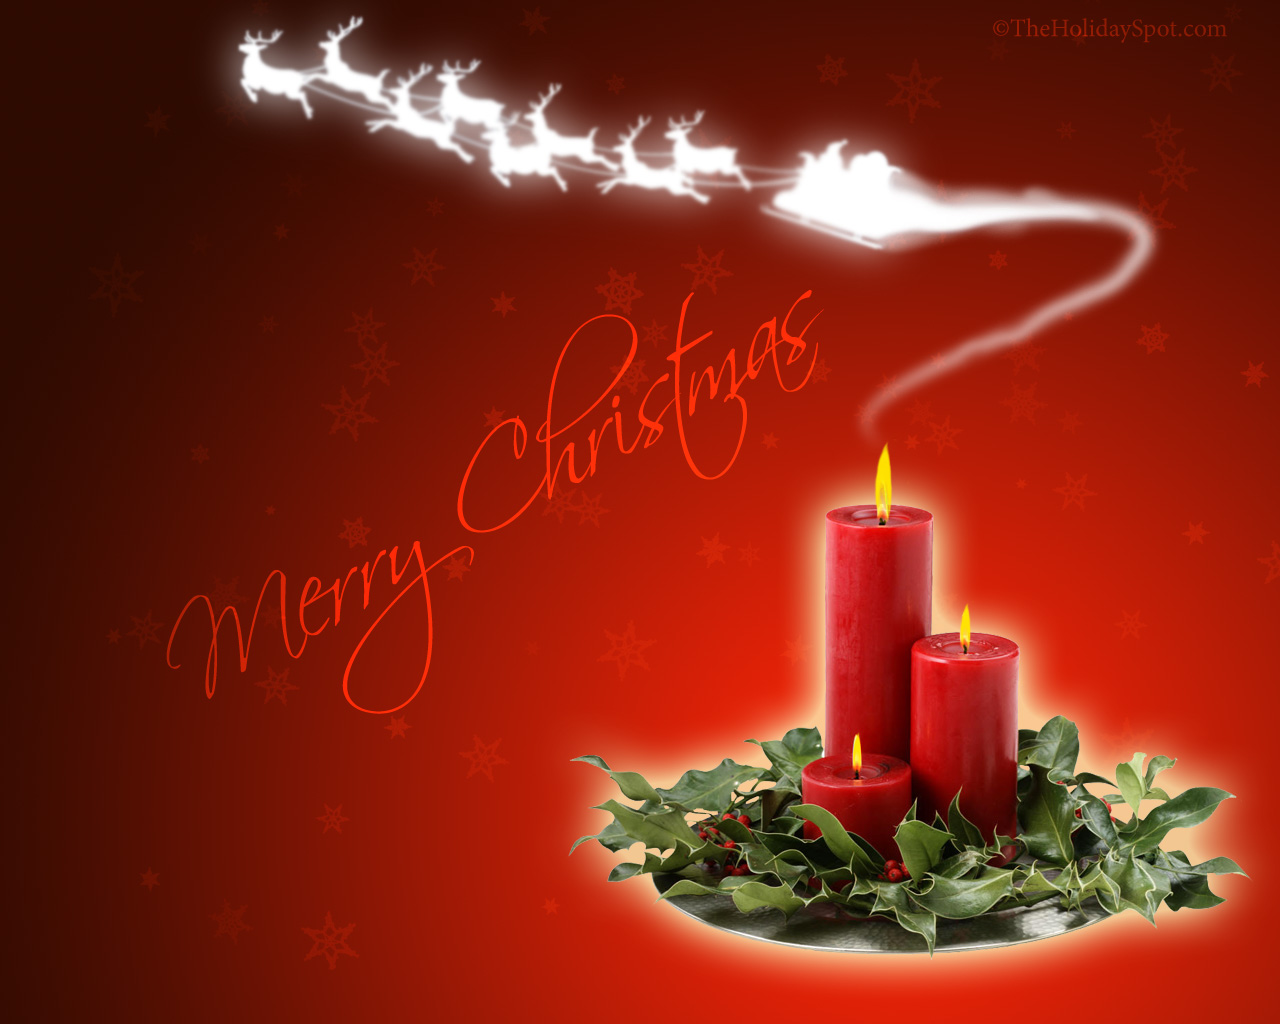 merry christmas wallpapers 1280x1024